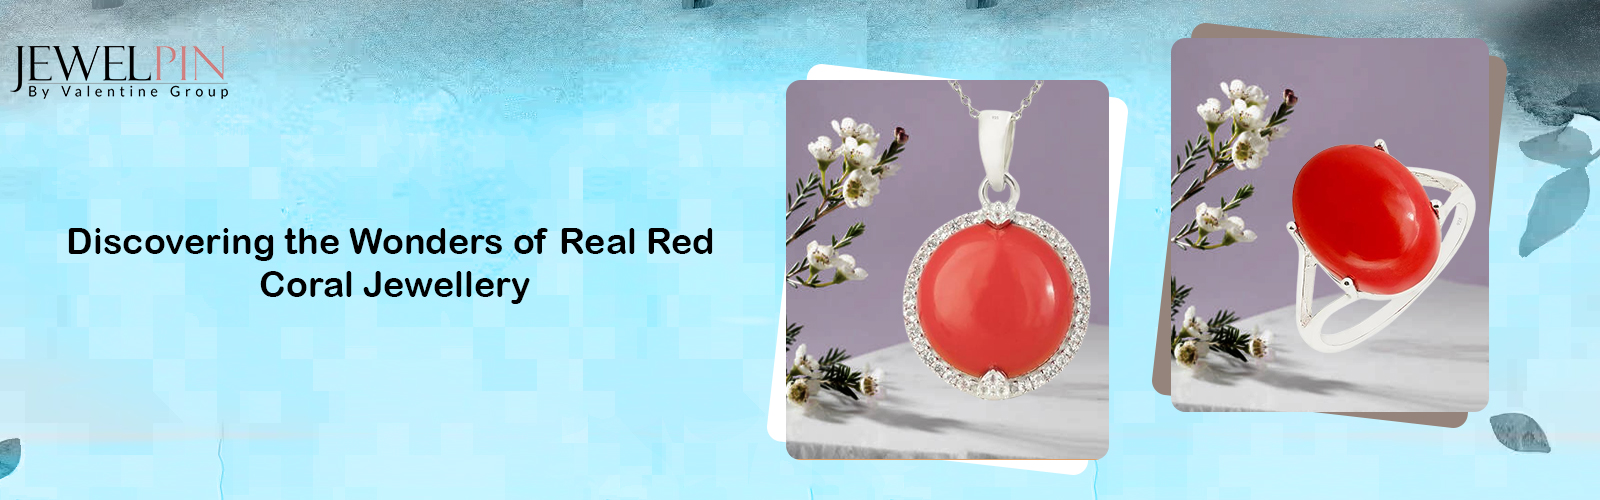 Discovering the Wonders of Real Red Coral Jewellery - JewelPIn